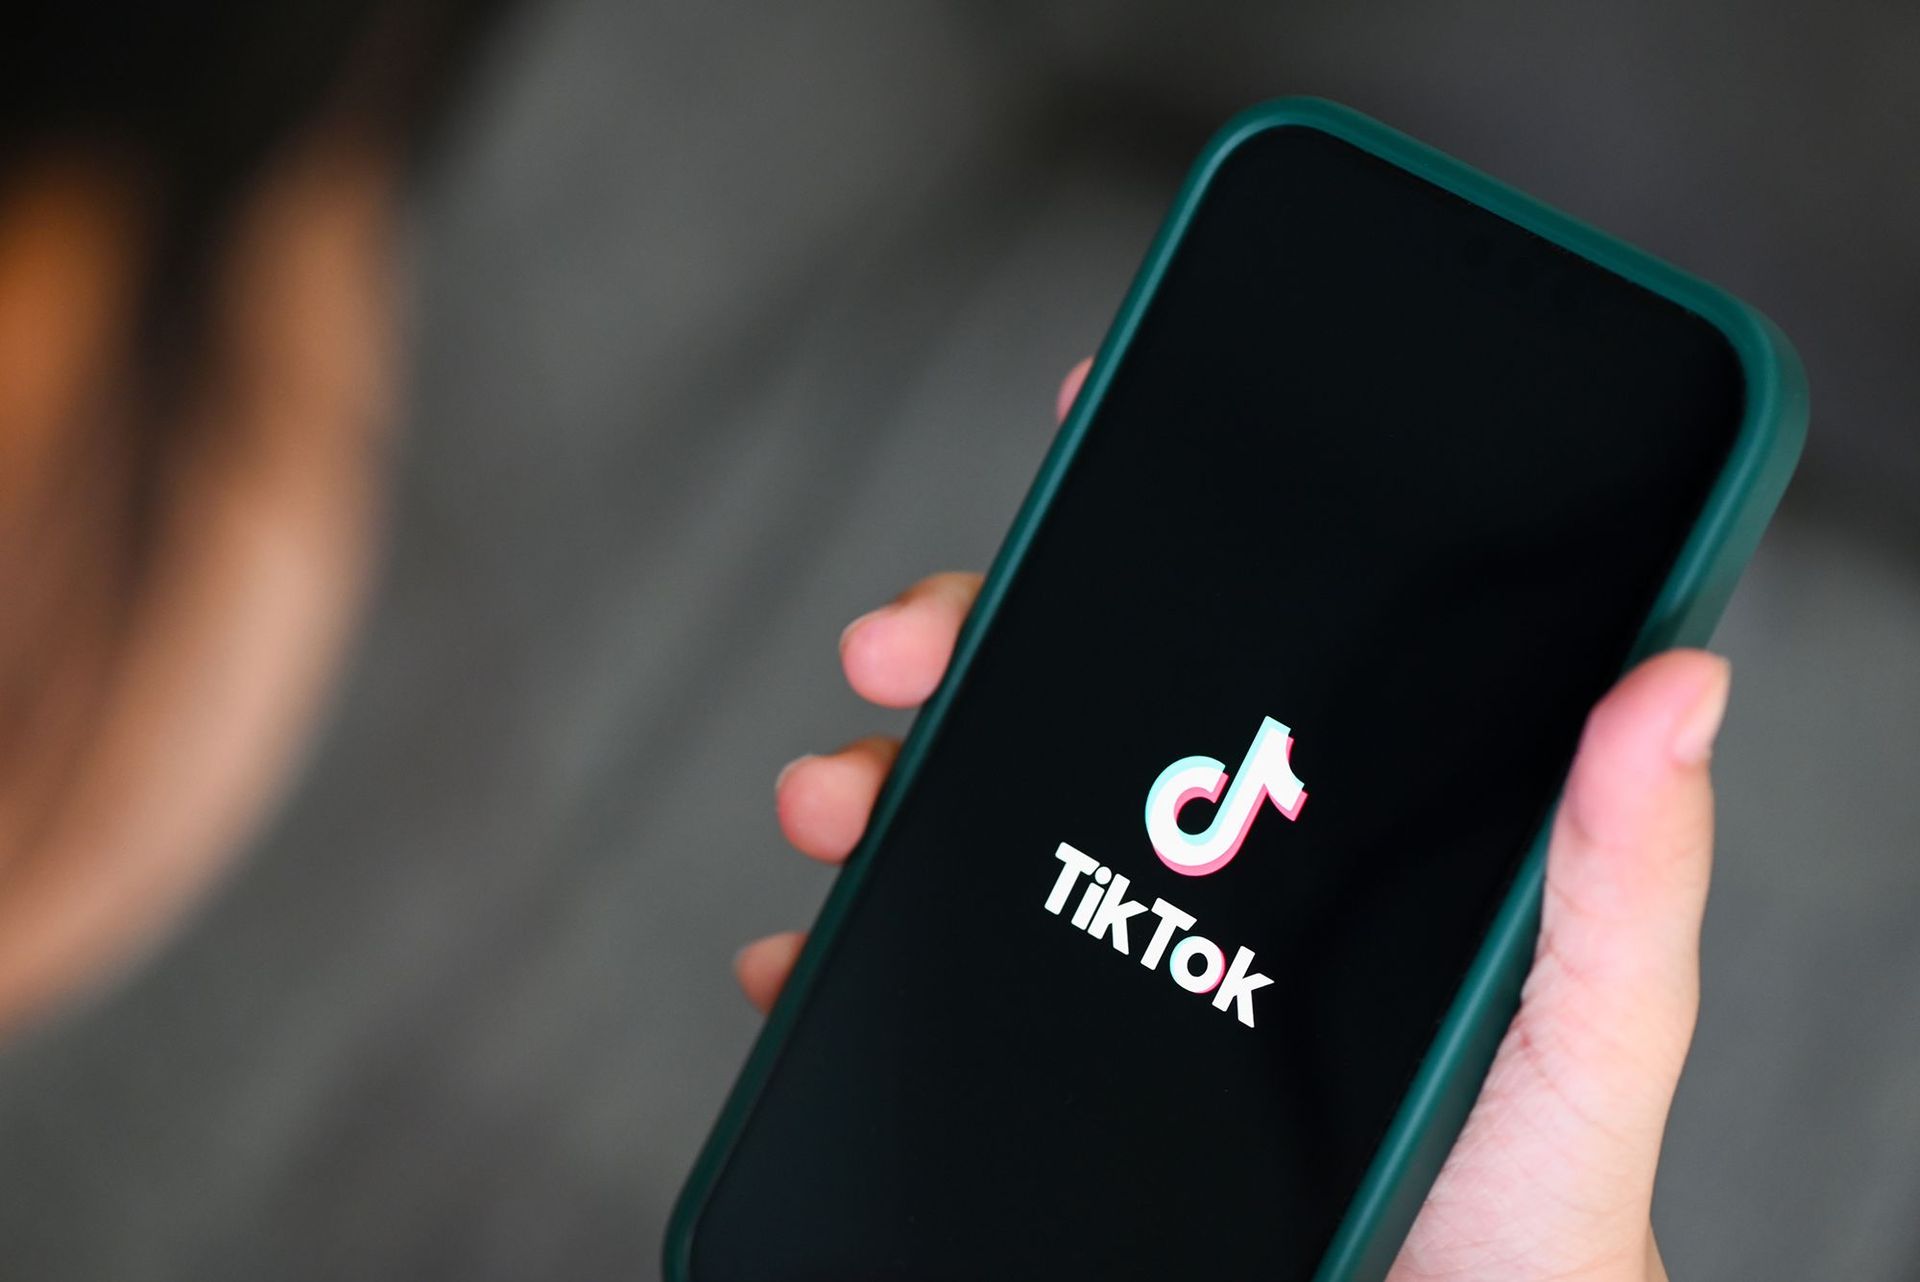 TikTok parent ByteDance planned to use the app to track individuals in the US